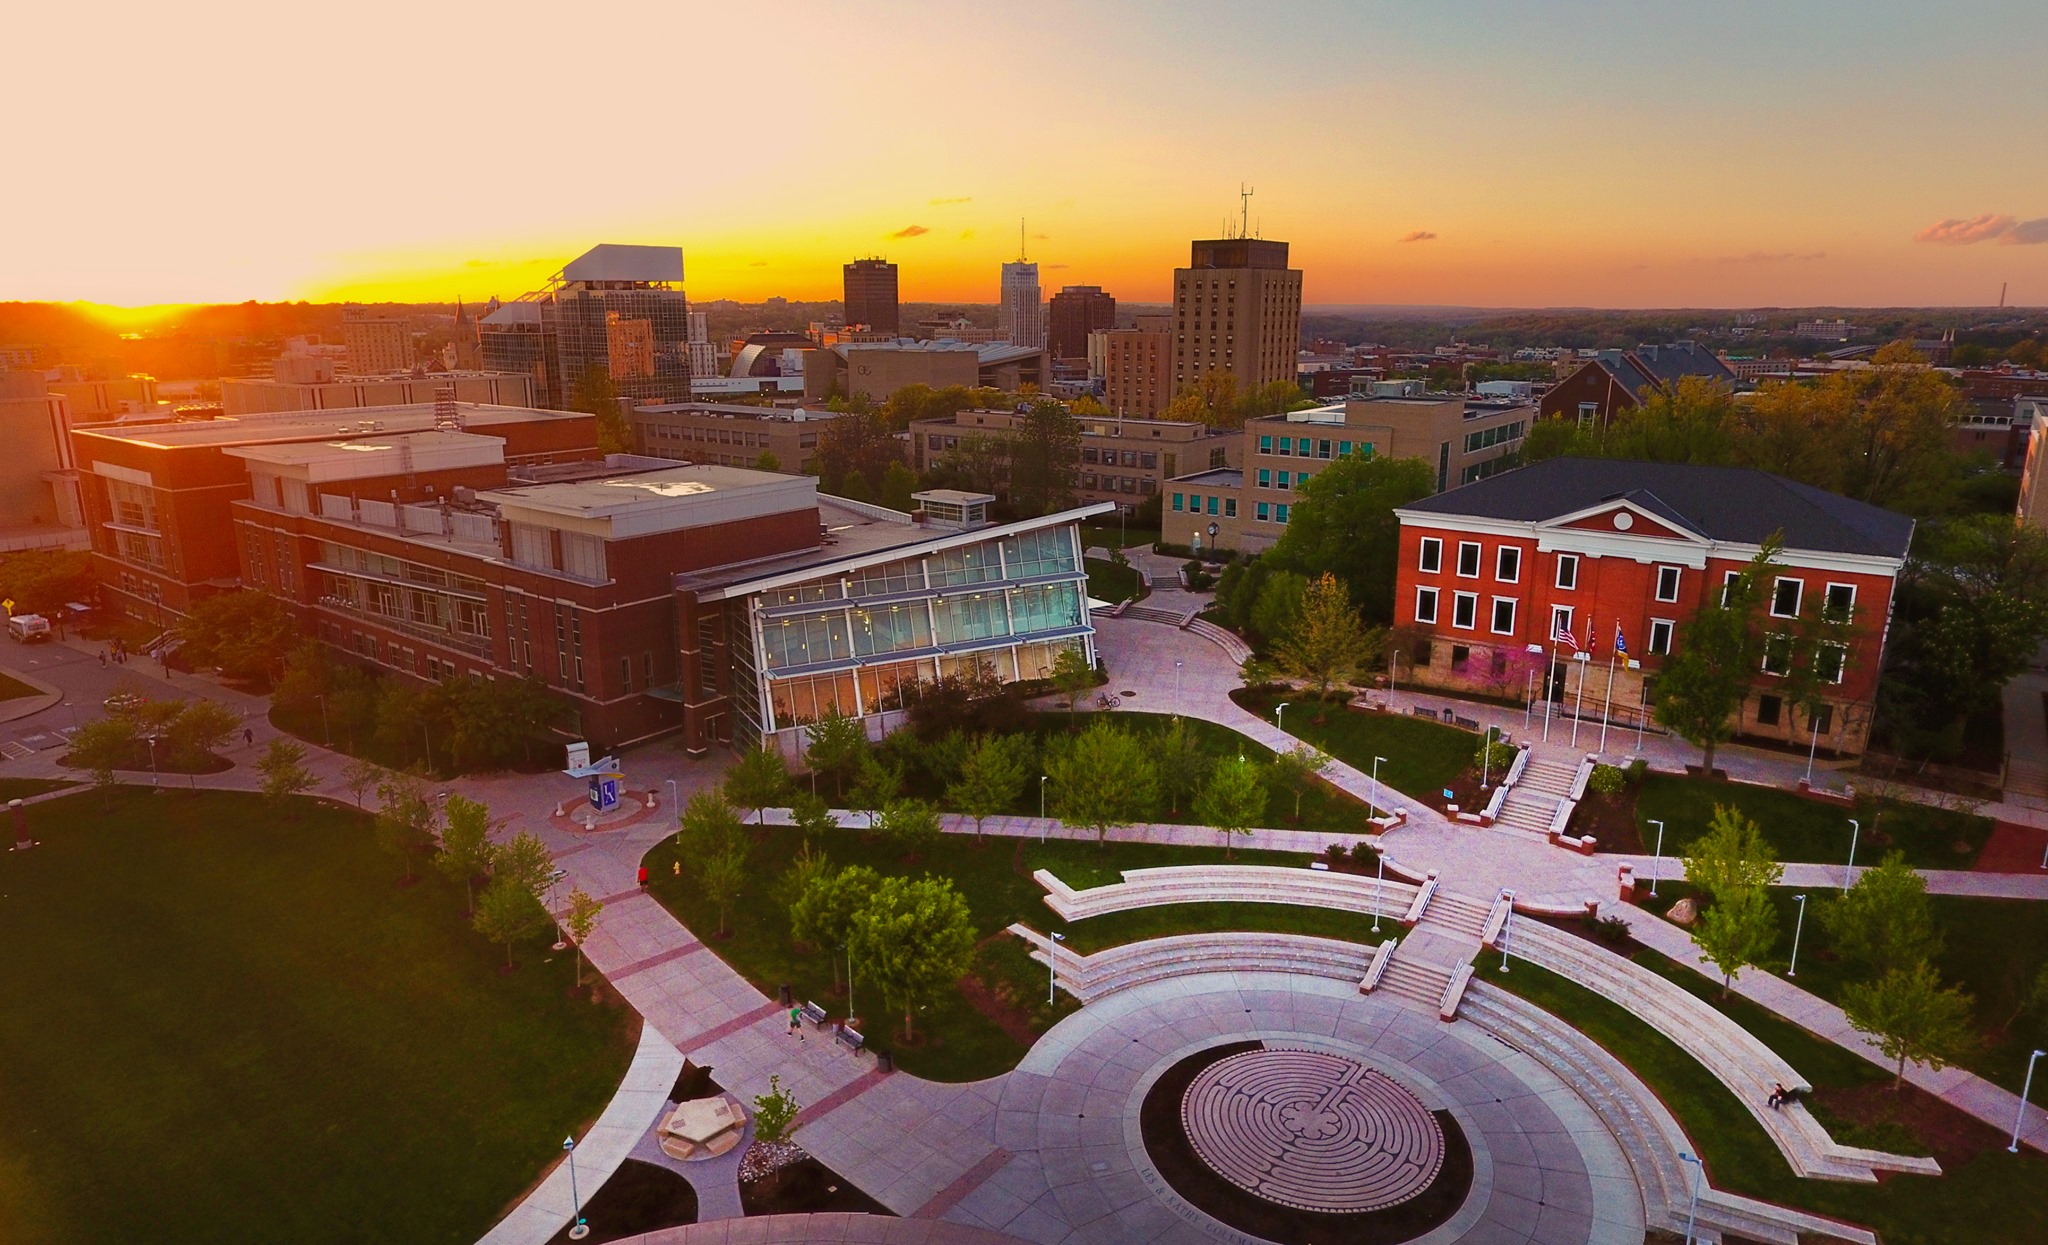 The university of Akron at sunset